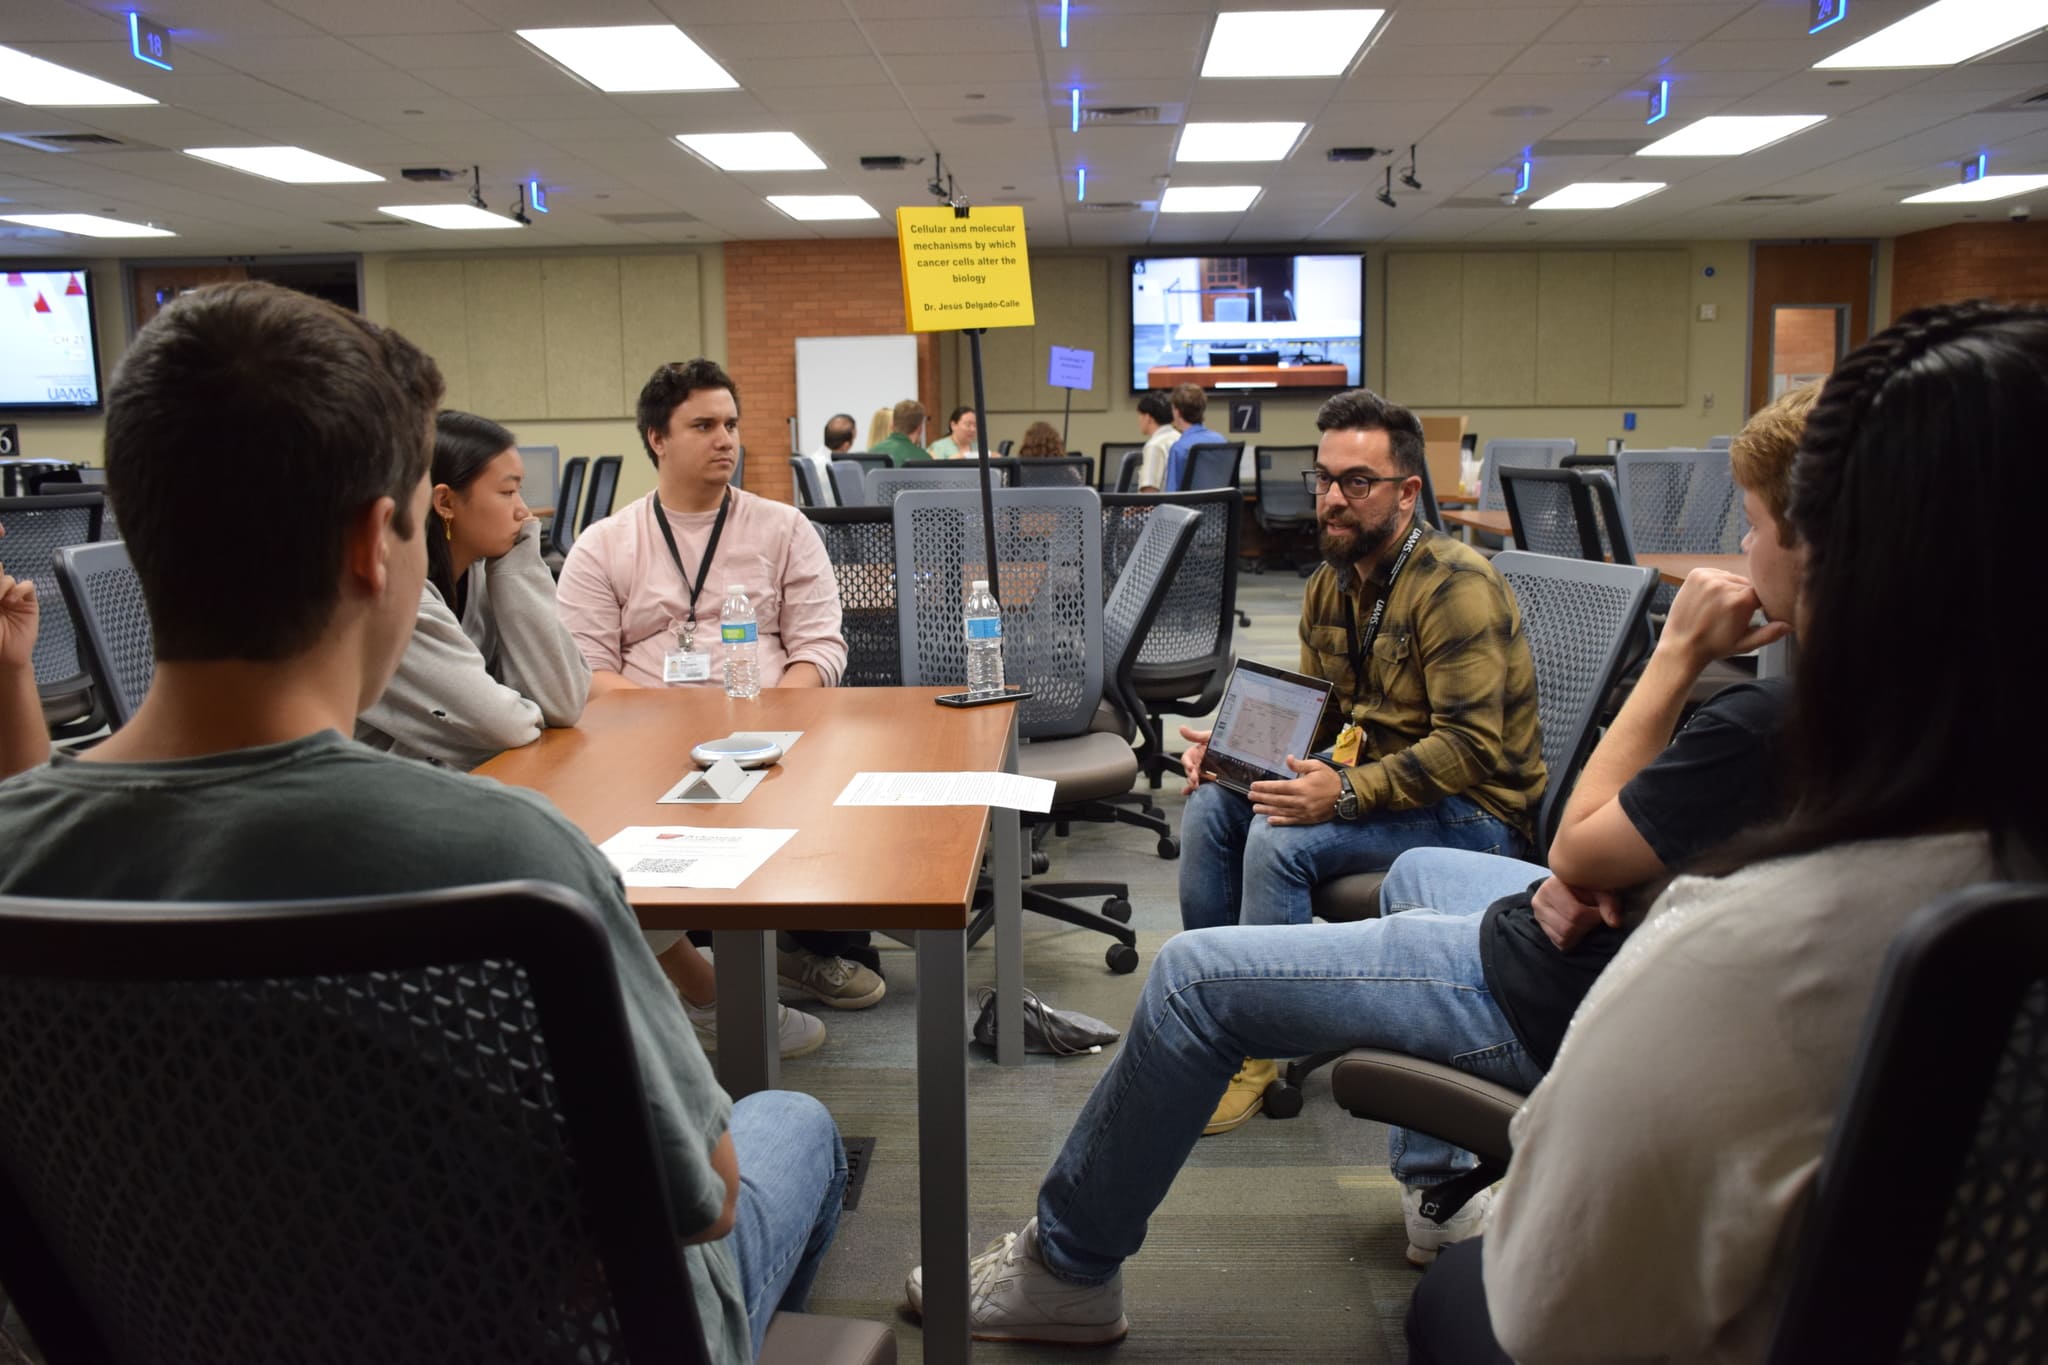 Jesus Delgado-Calle, an assistant professor of physiology and cell biology at UAMS, discusses his research with undergraduates and his team.